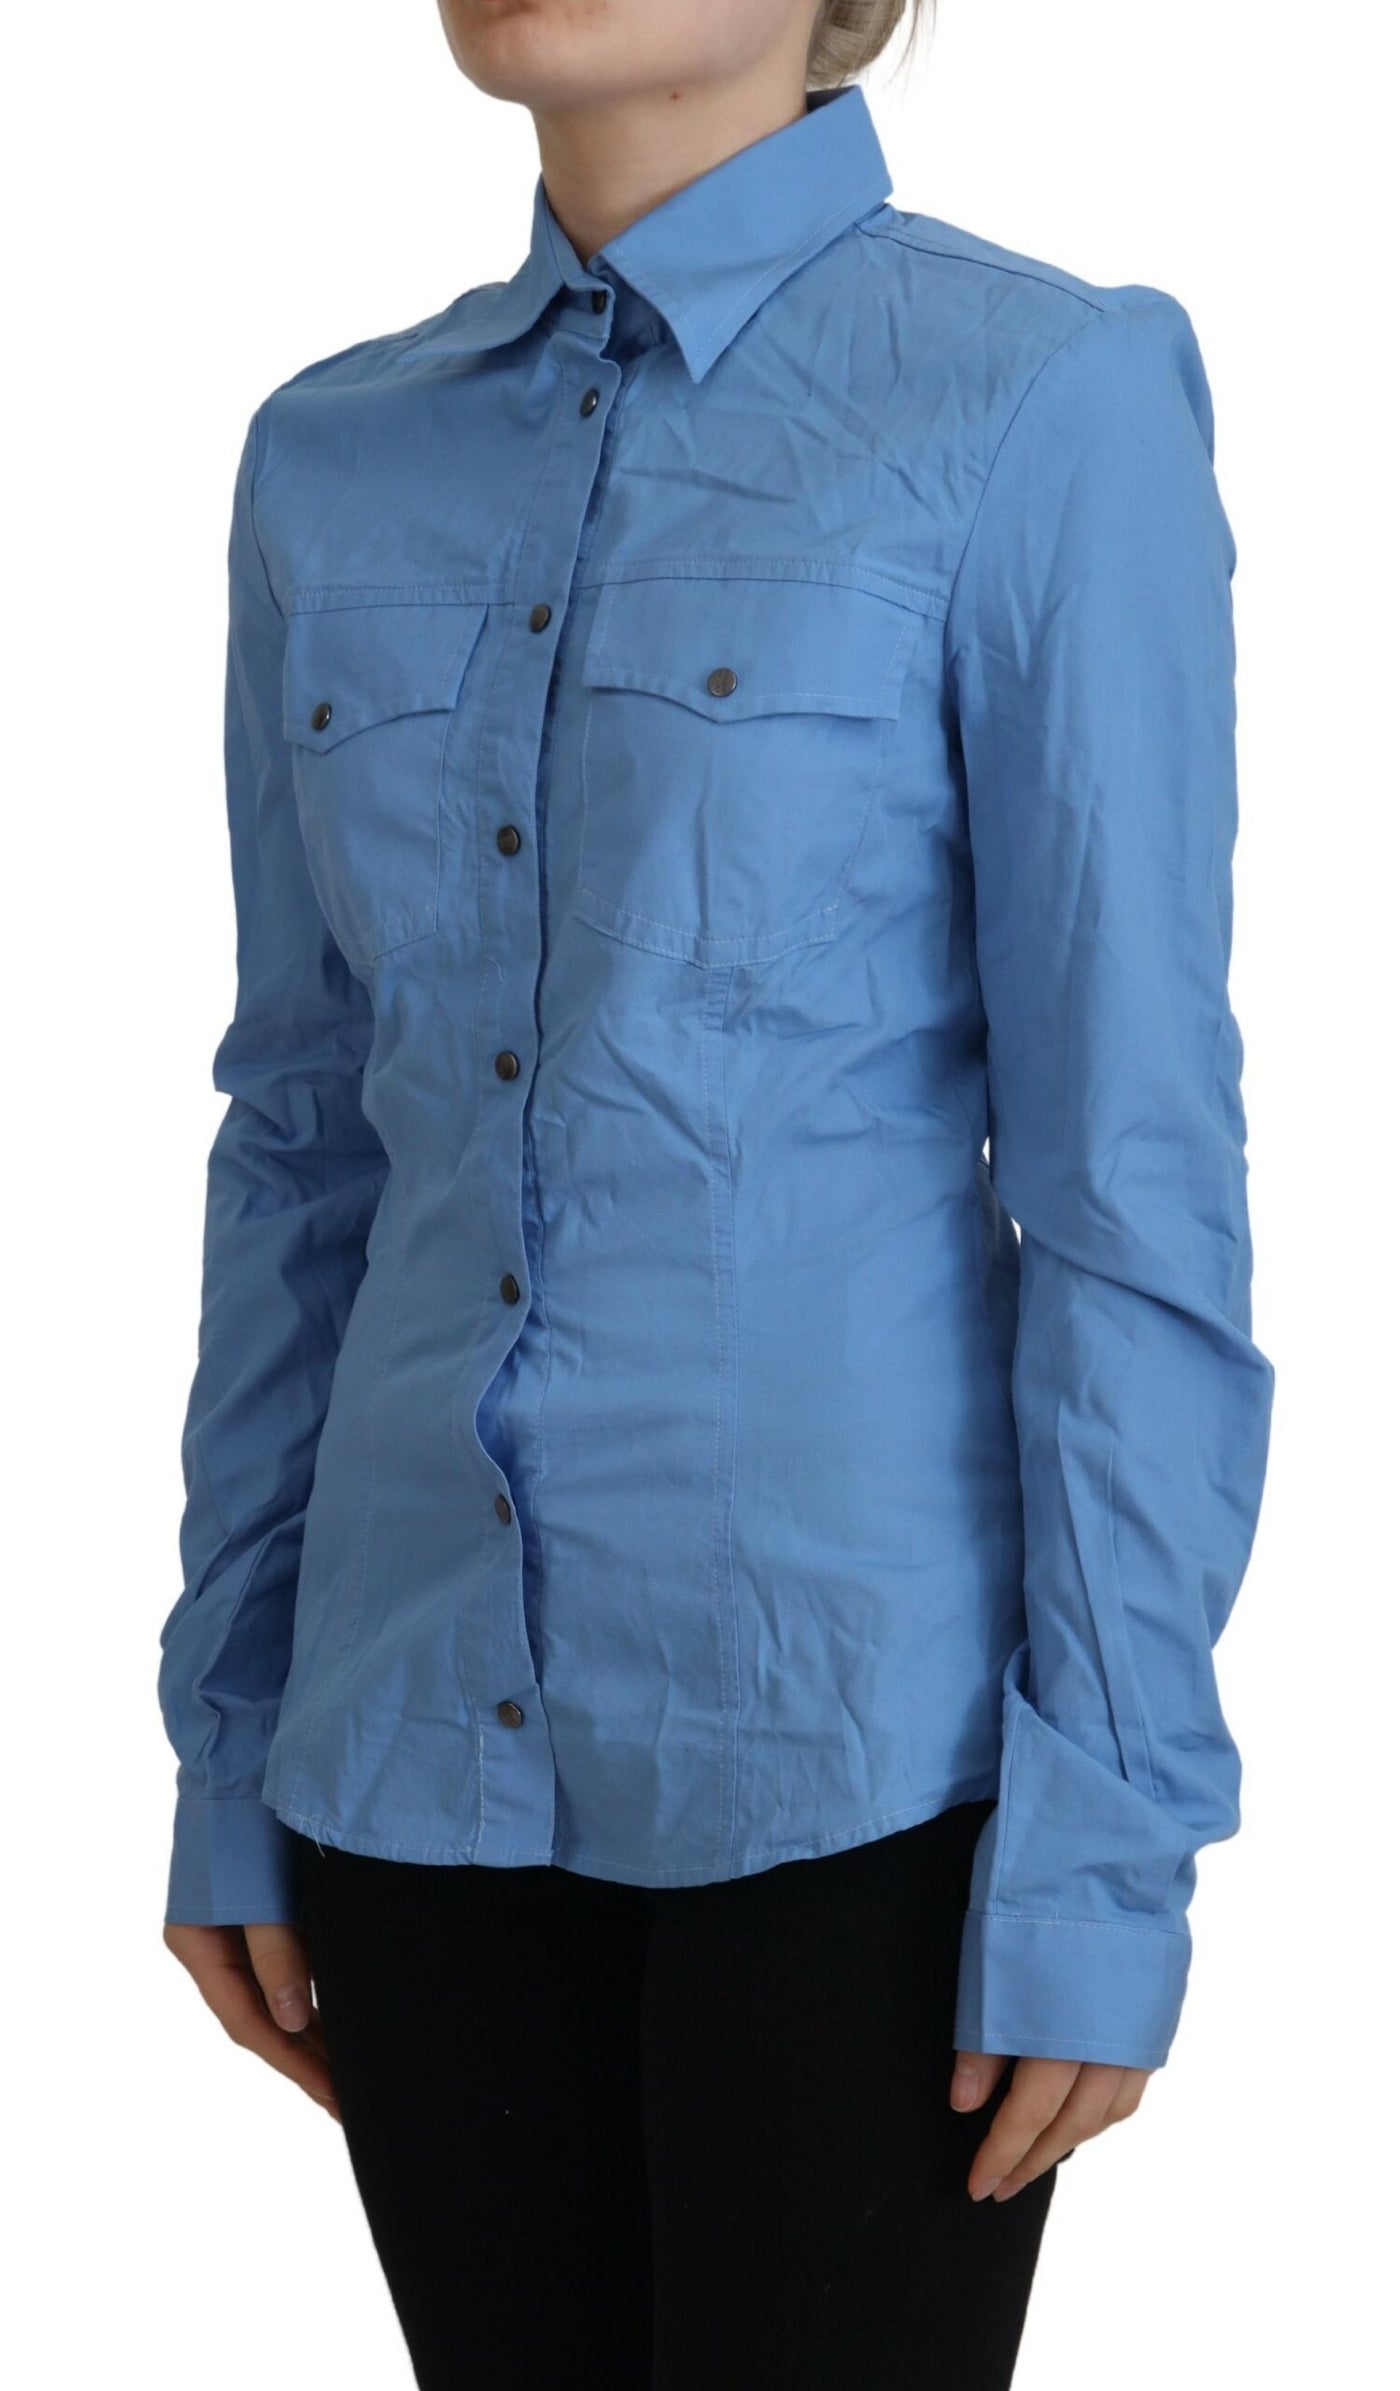 Blue Cotton Long Sleeves Collared Button Down Top